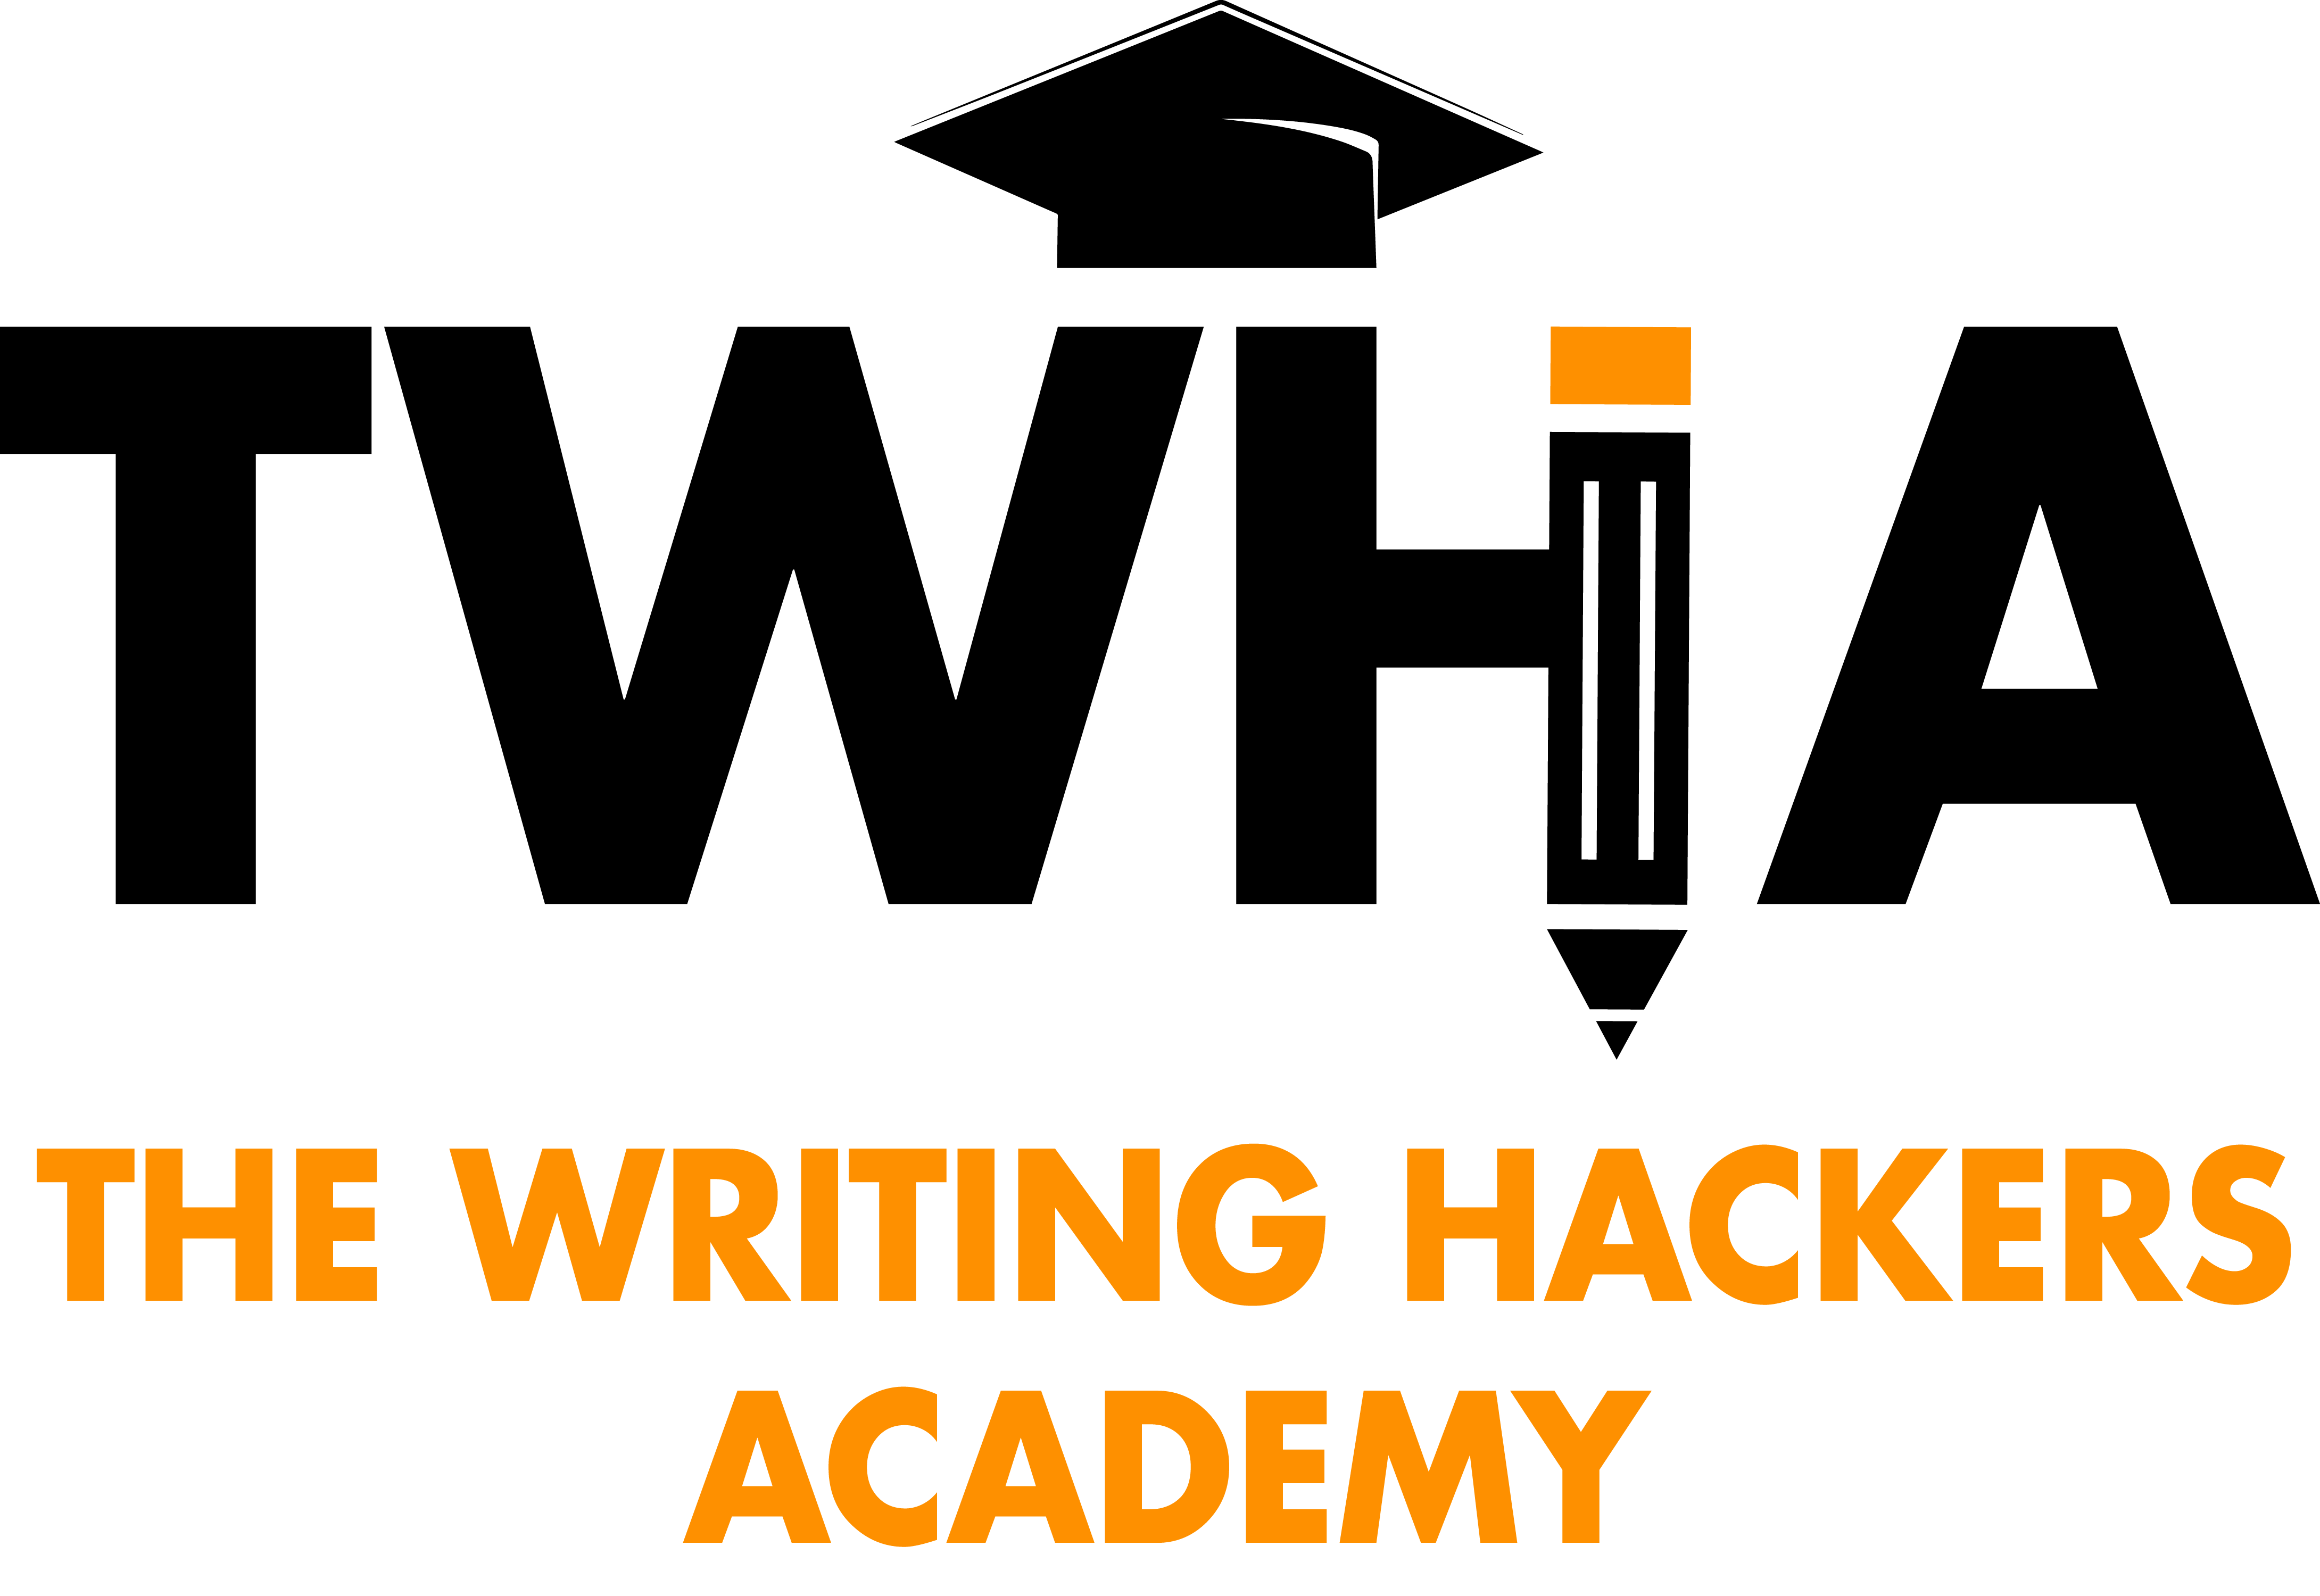 The Writing Hackers Academy